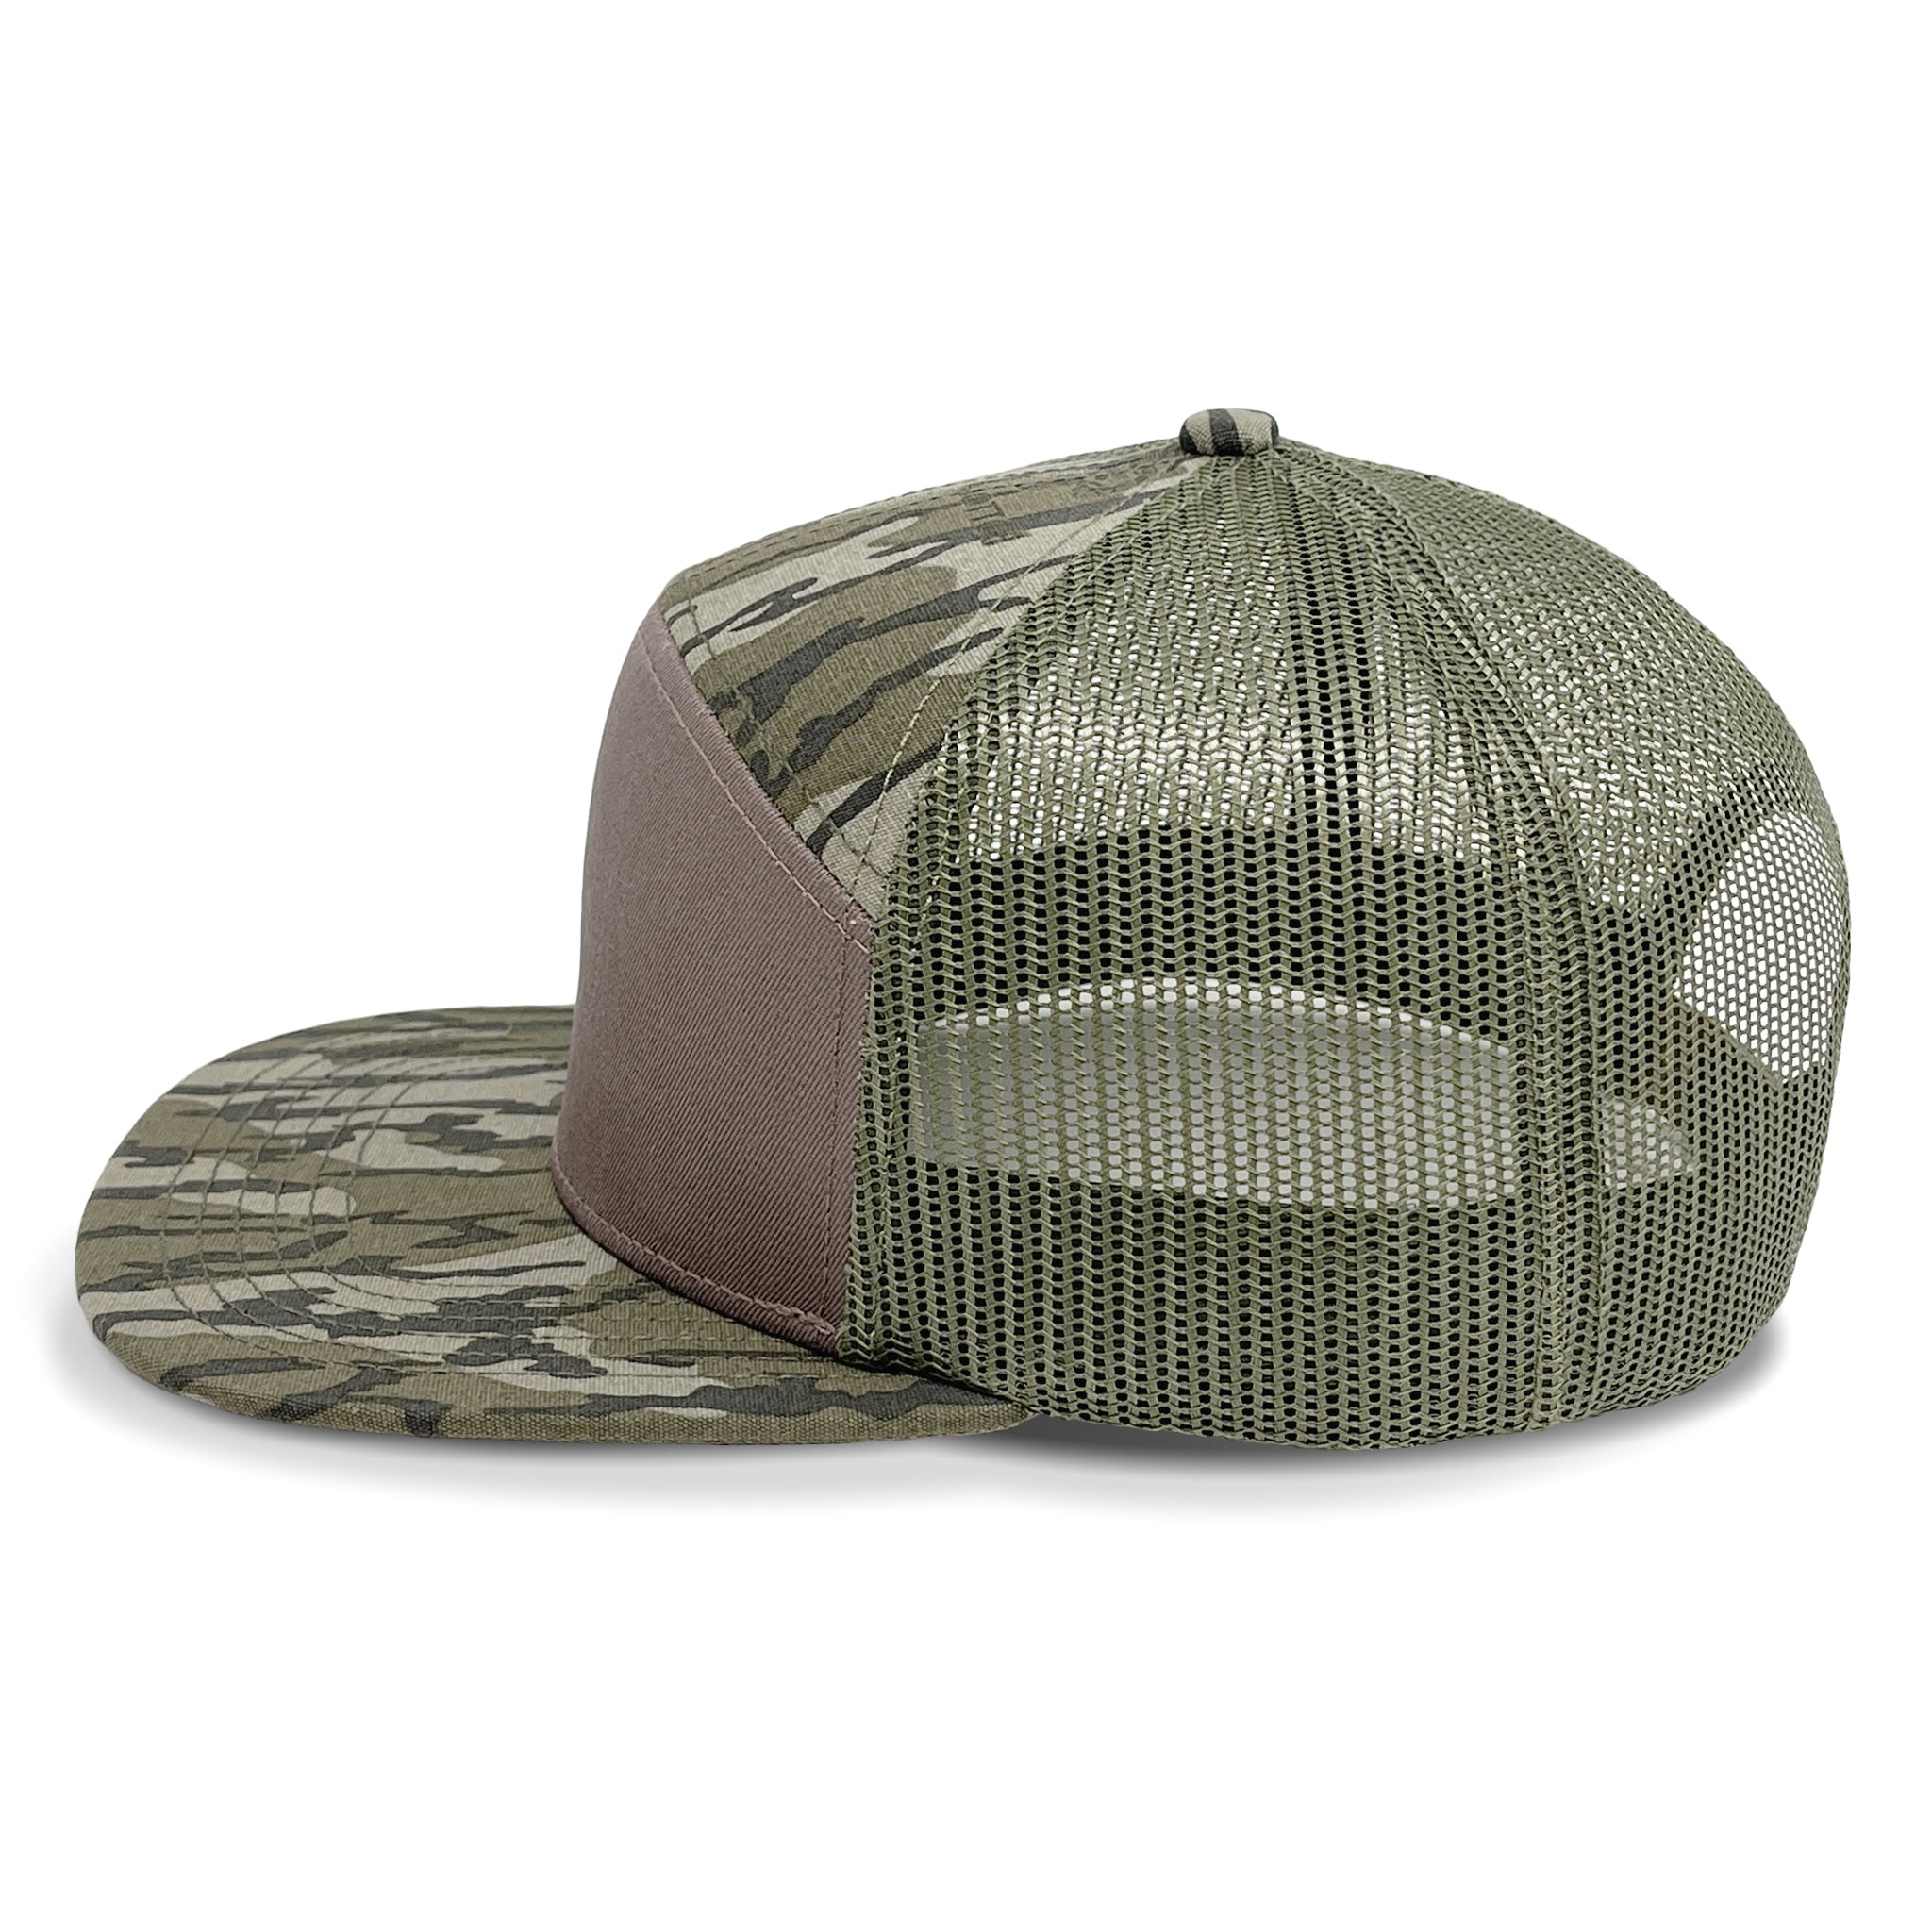 Mossy Oak Fishing Hat – Luckless Outfitters